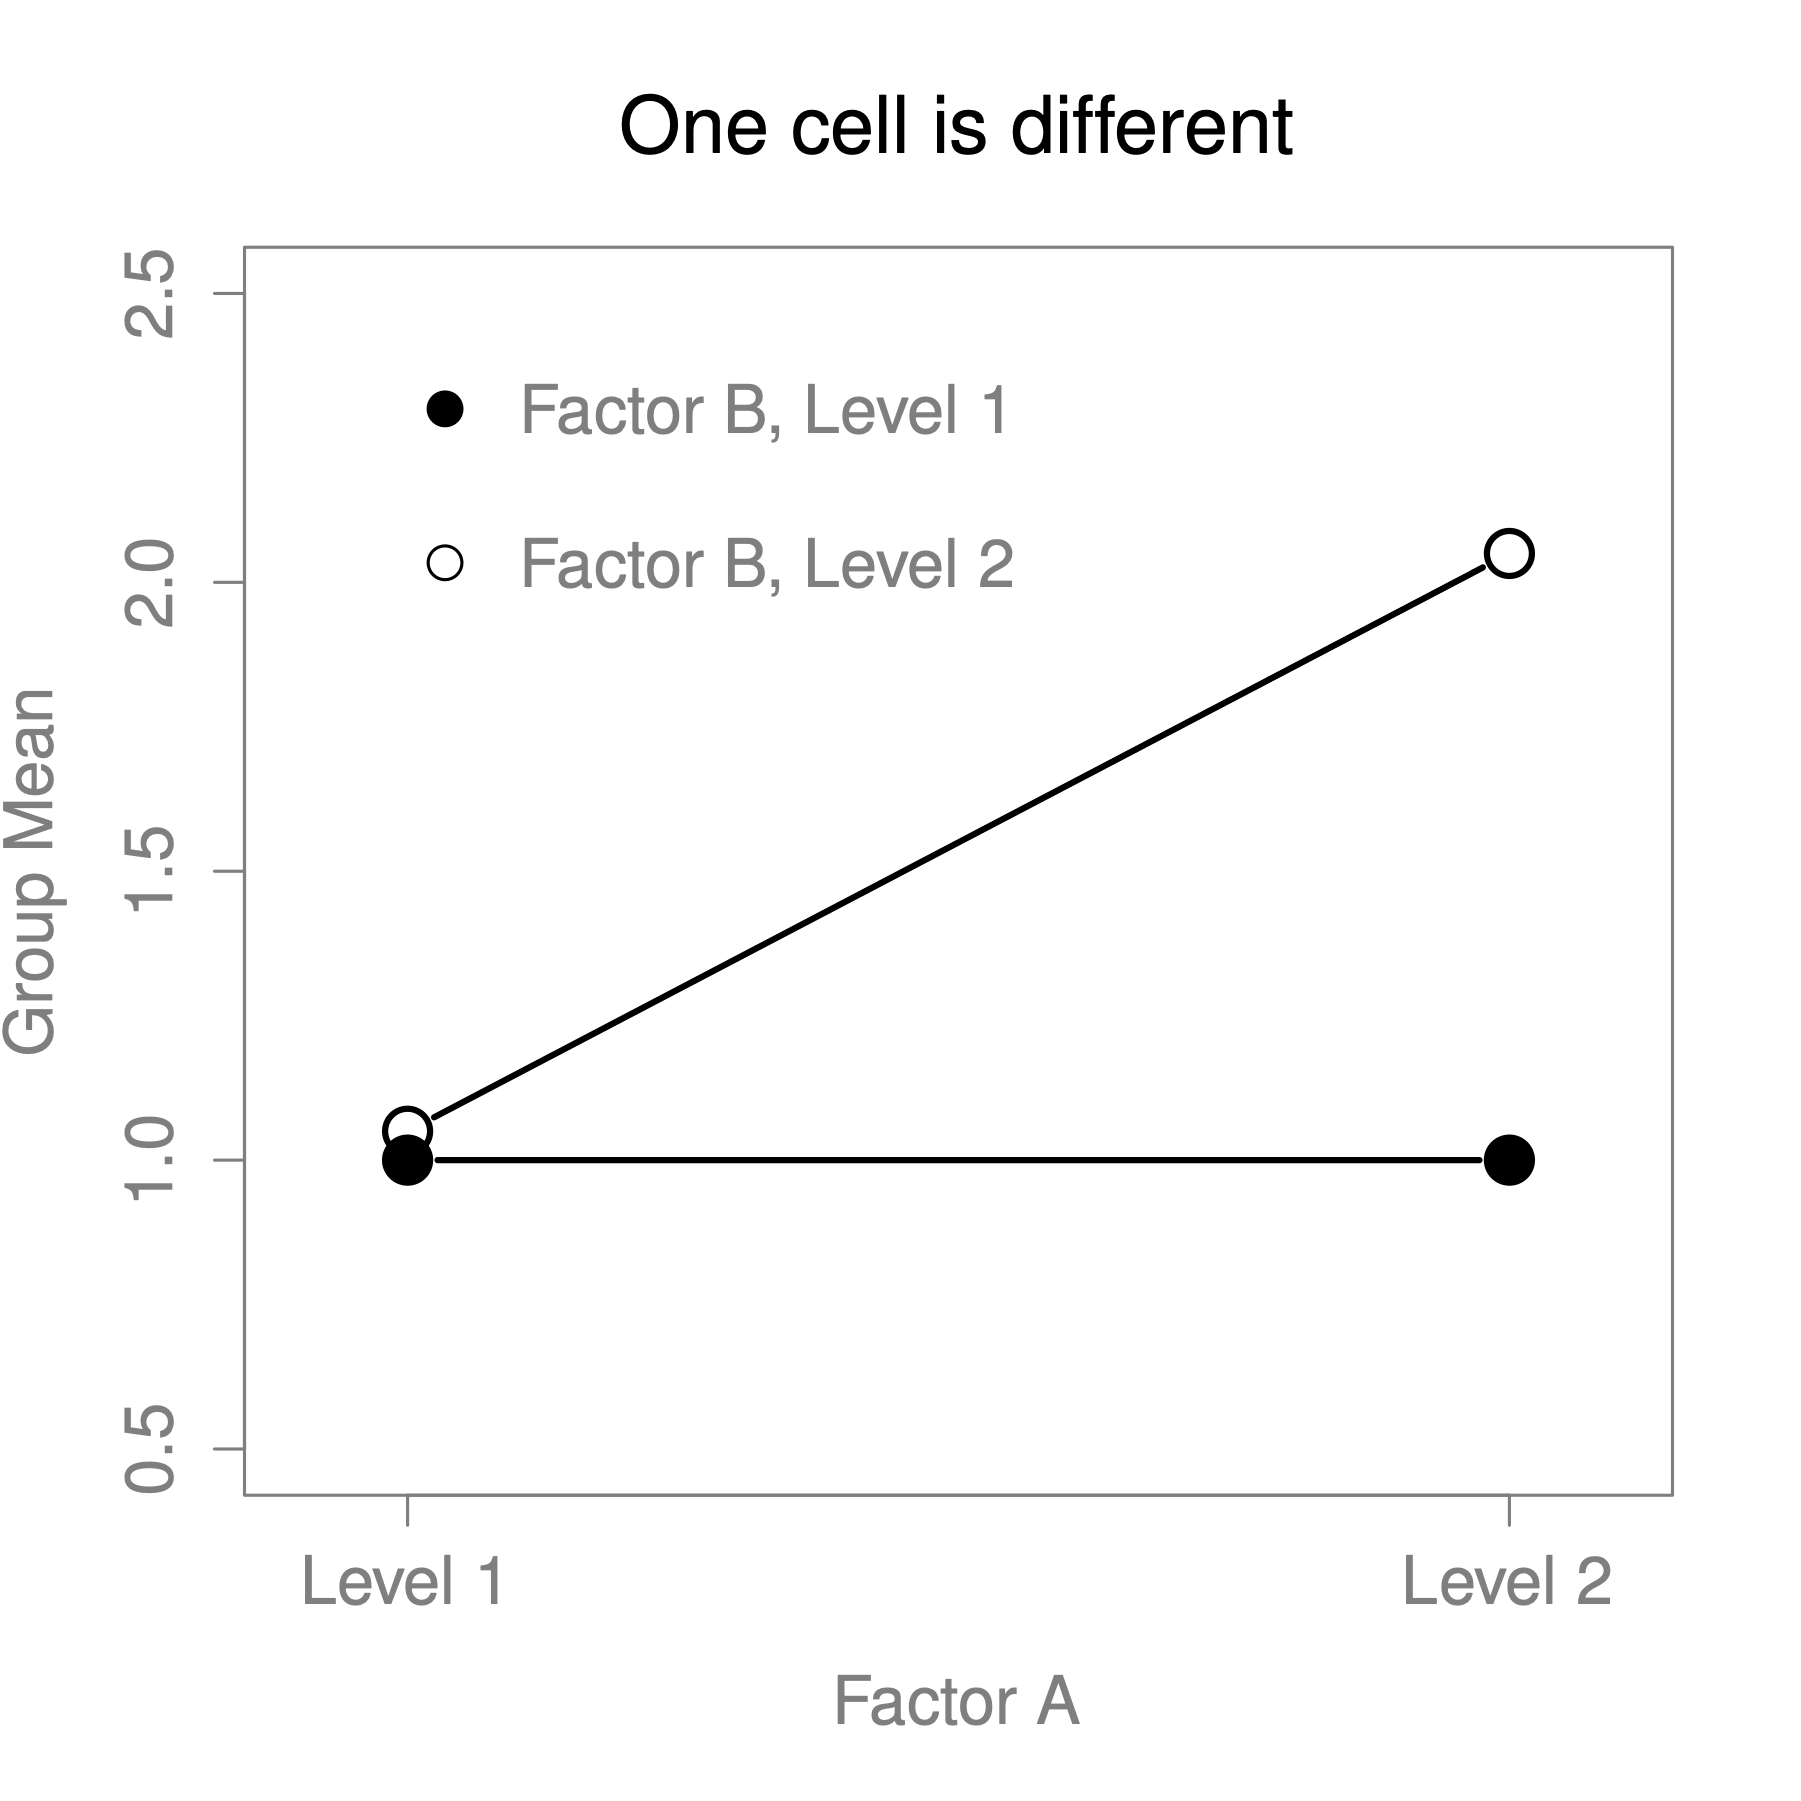 Qualitatively different interactions for a $2 \times 2$ ANOVA